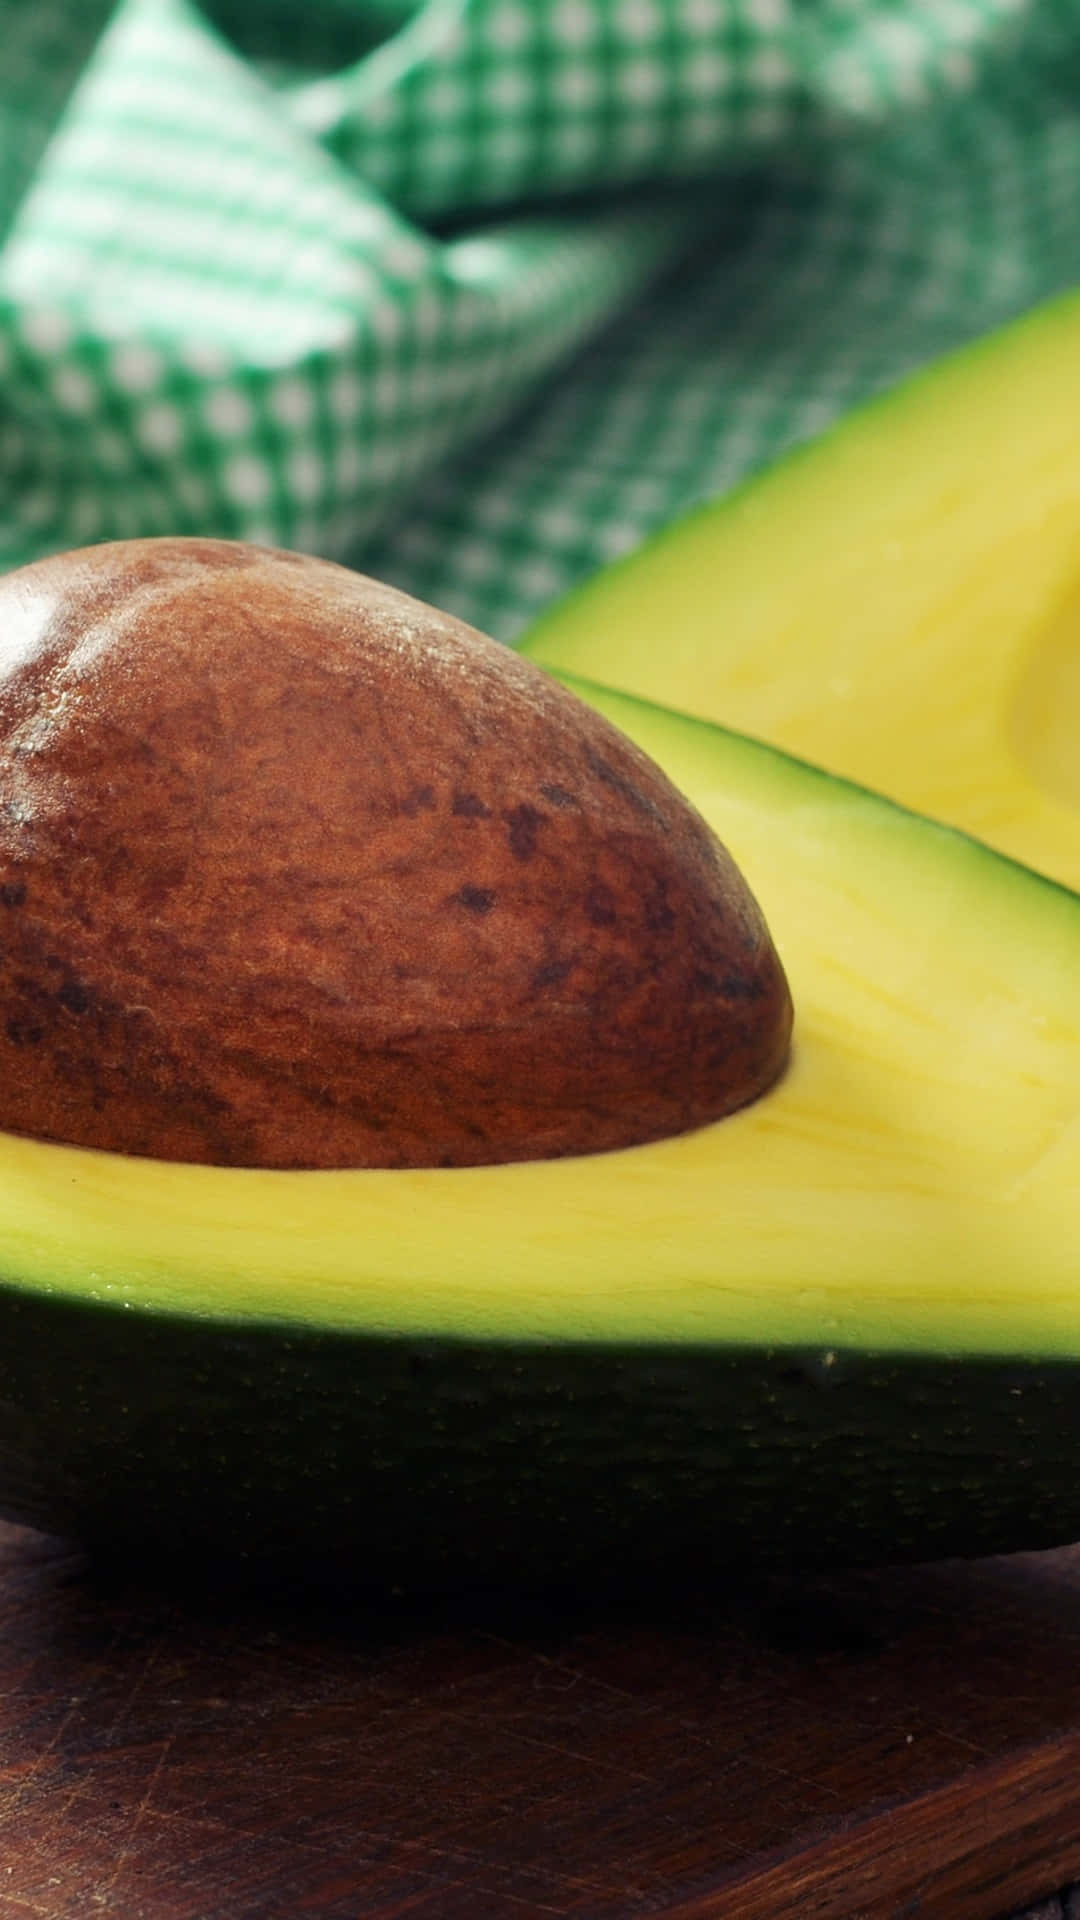 Avocado Iphone for nature lovers Wallpaper